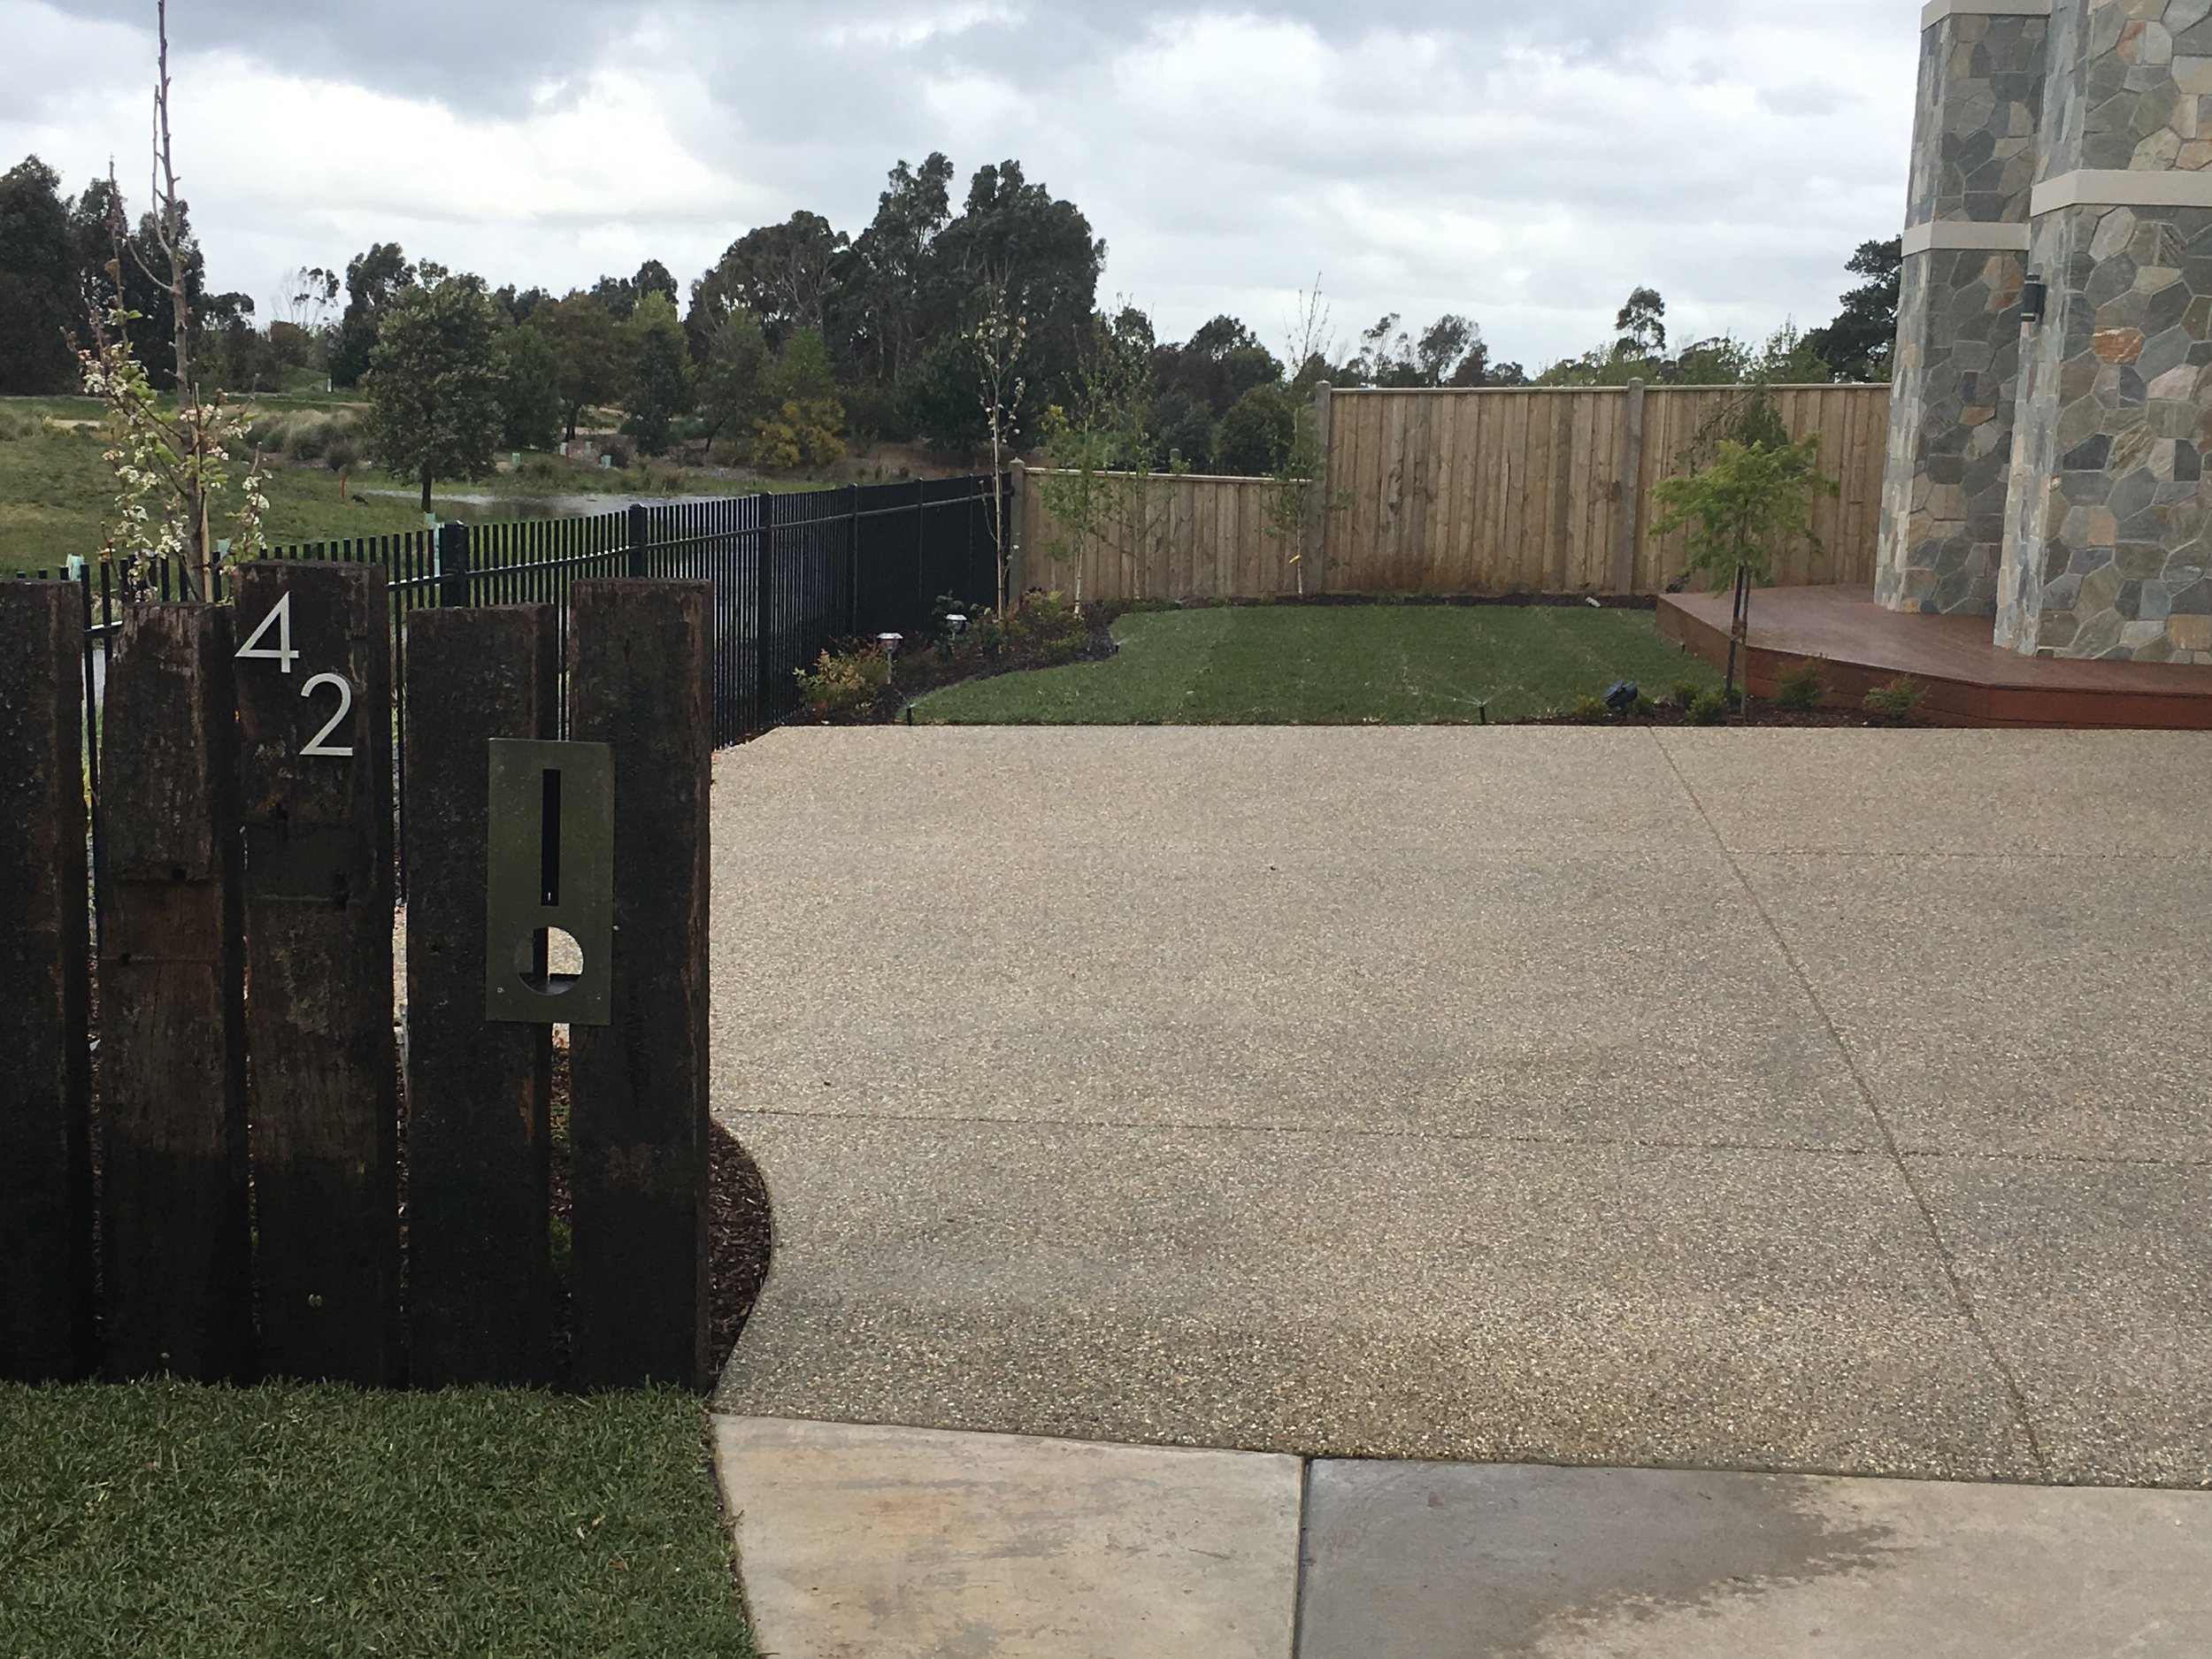 Instant turf, garden bed and old sleeper upright staggered fence with letter box